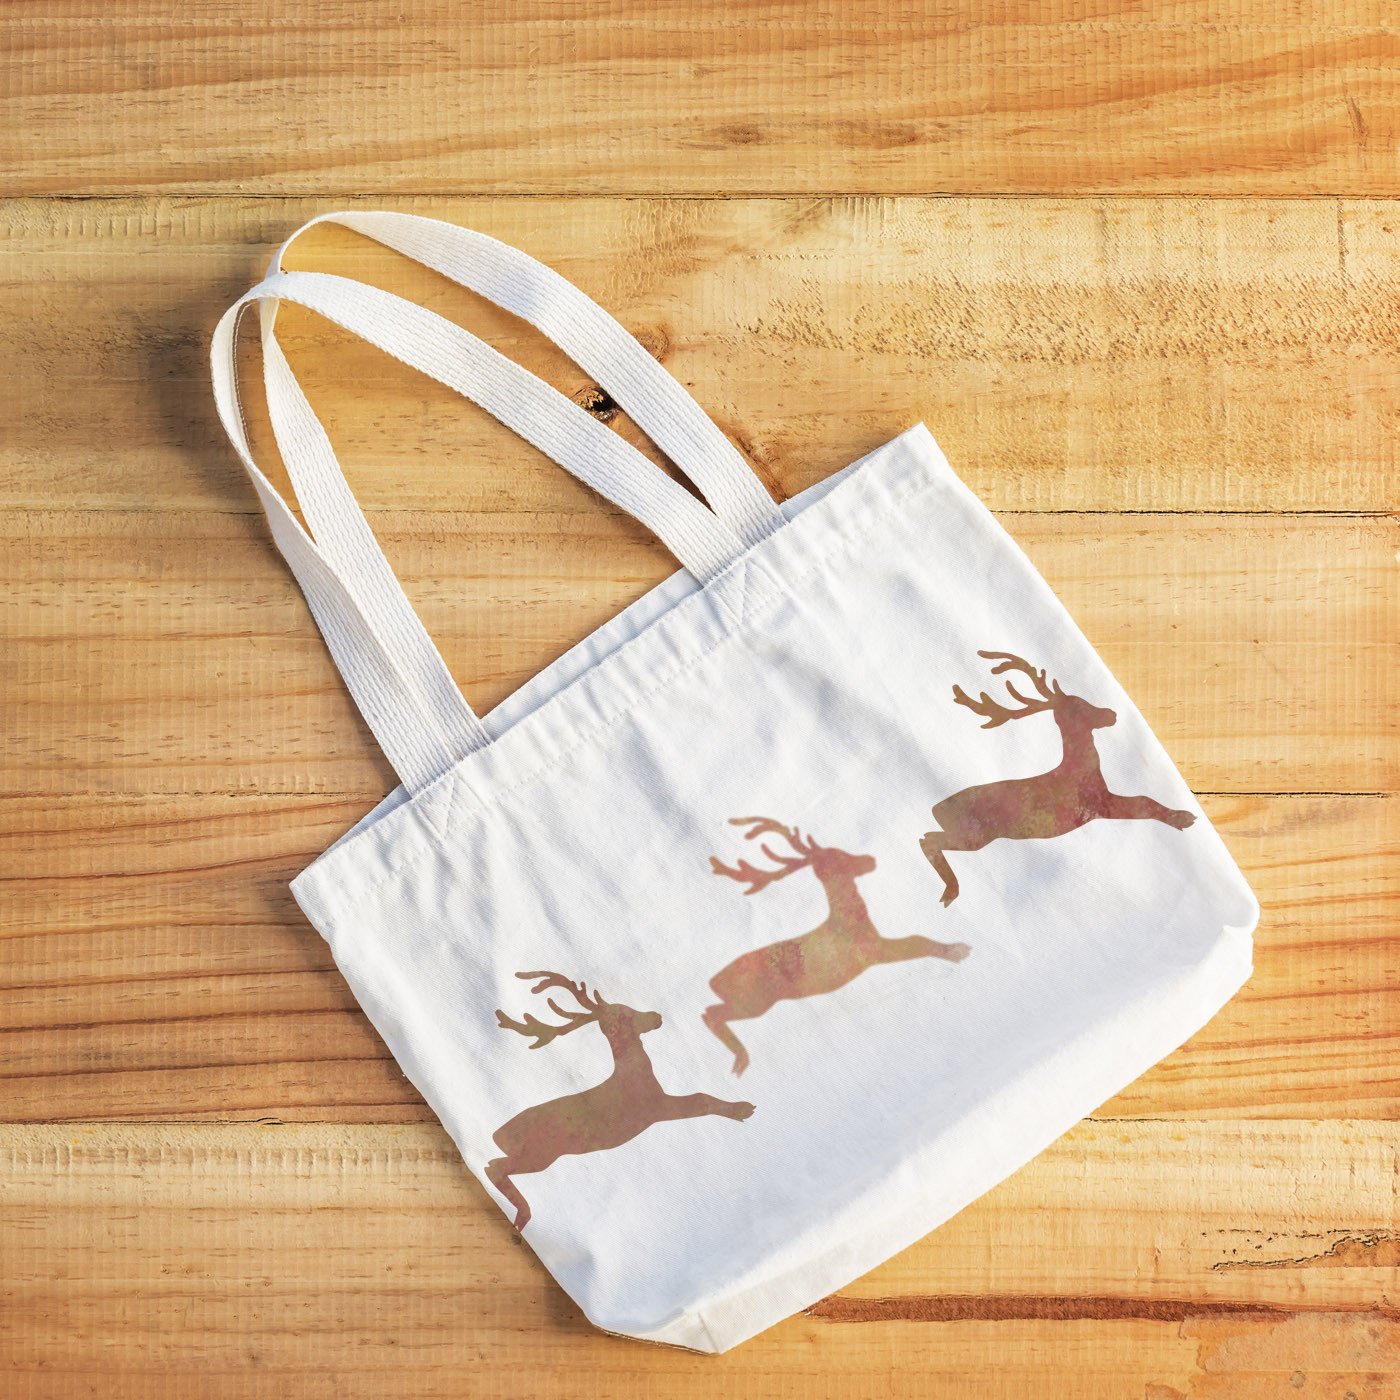 CraftStar Leaping Stag Stencil on fabric